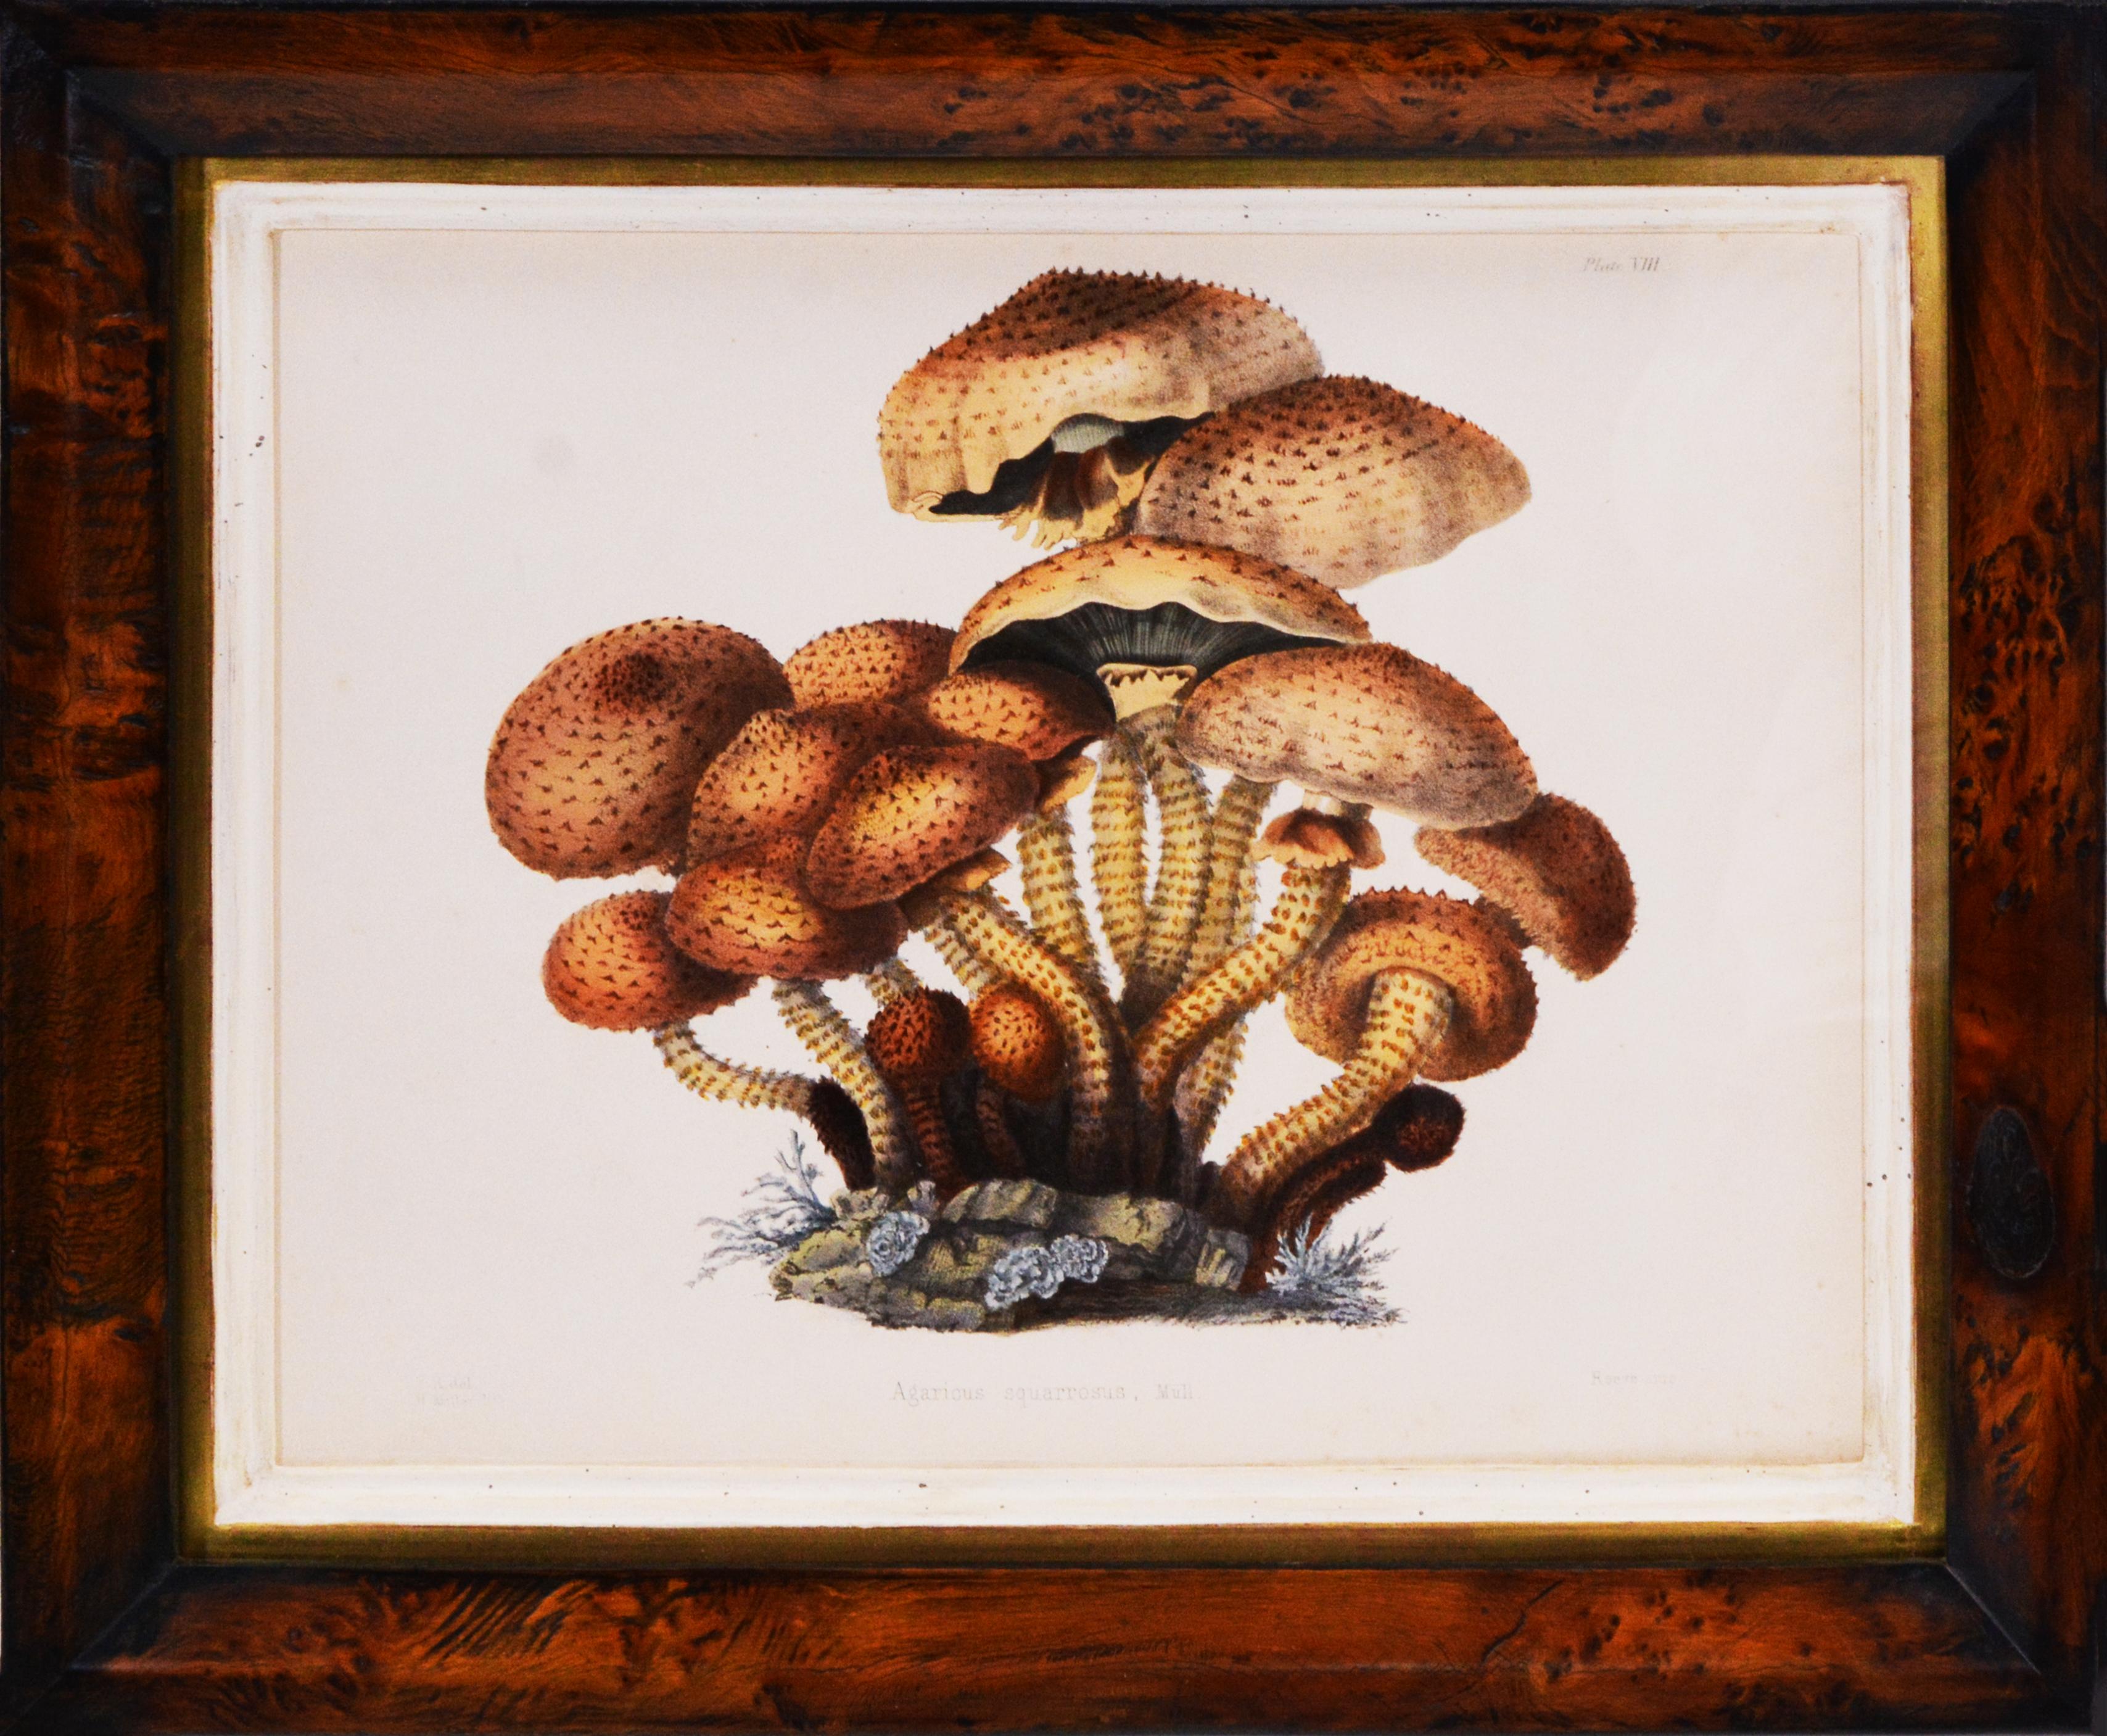 Unknown Figurative Print - Hussey, Group of 8 Illustrations of British Mycology, Fungi and Mushrooms. 